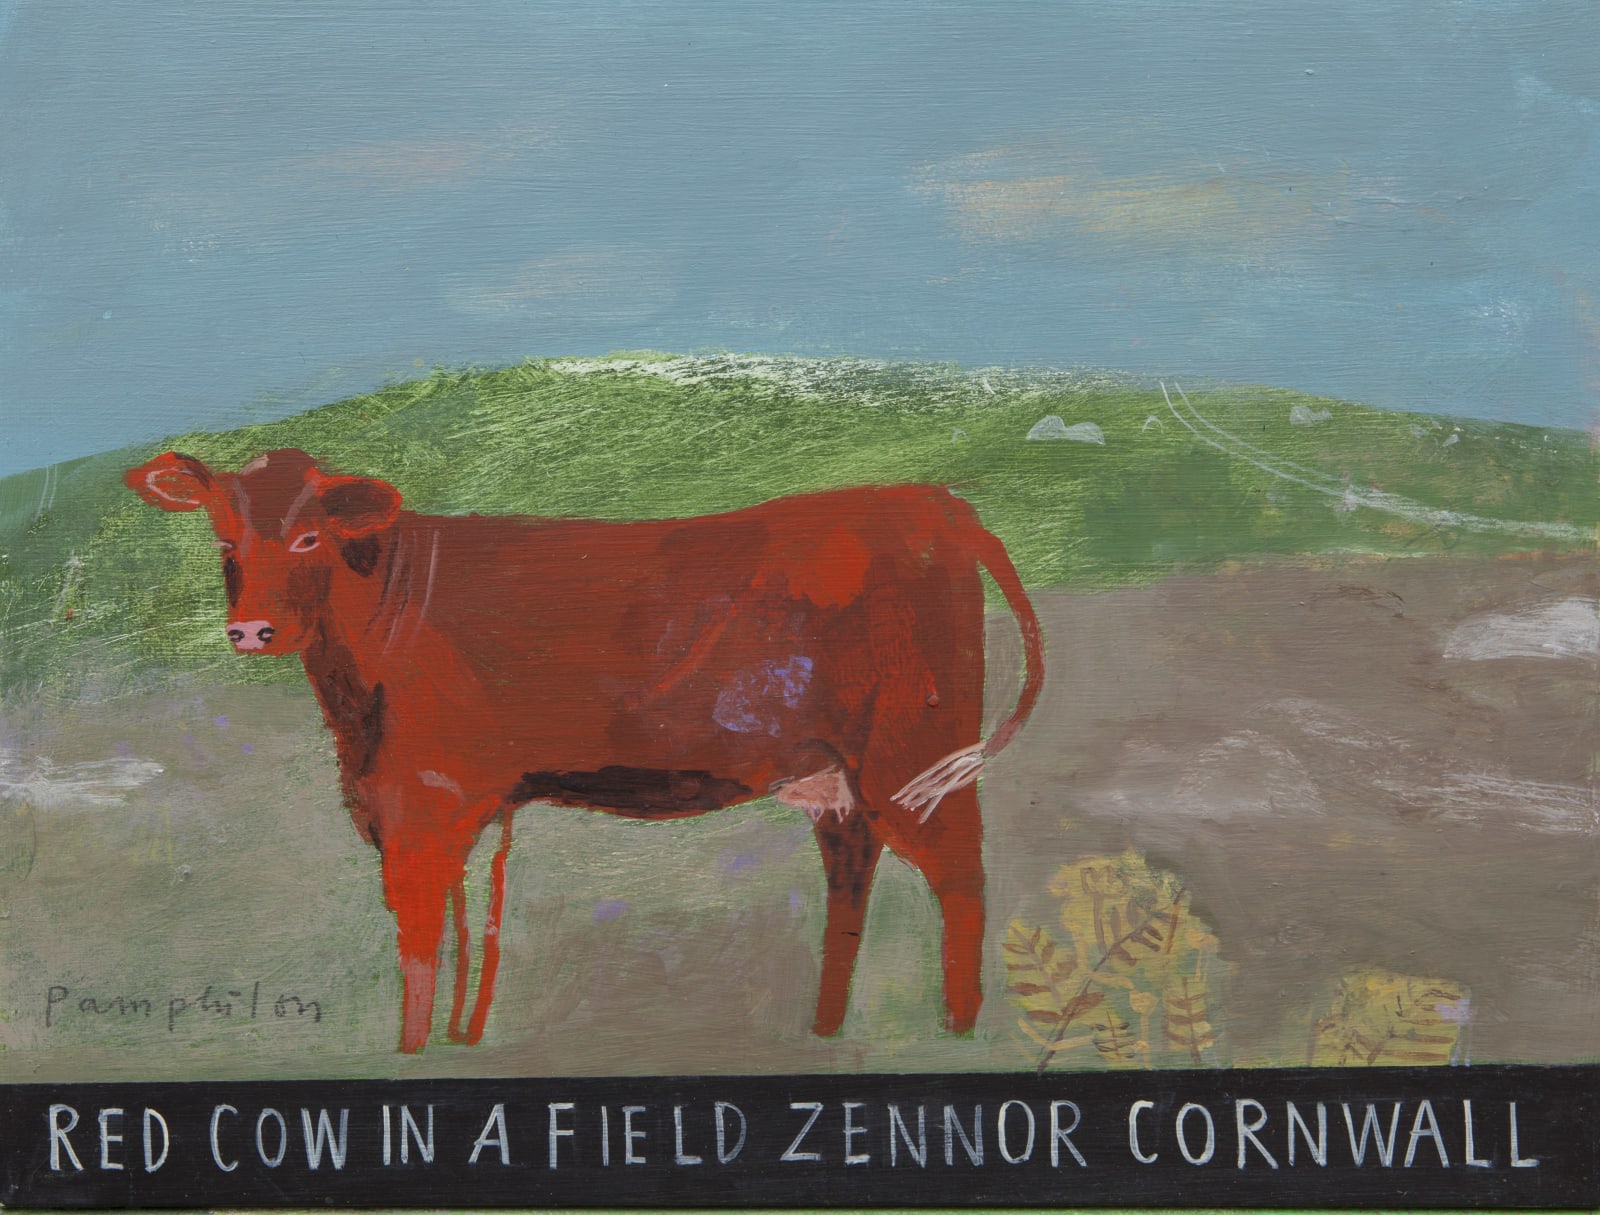 Elaine Pamphilon, Red Cow in a Field, Zennor Cornwall